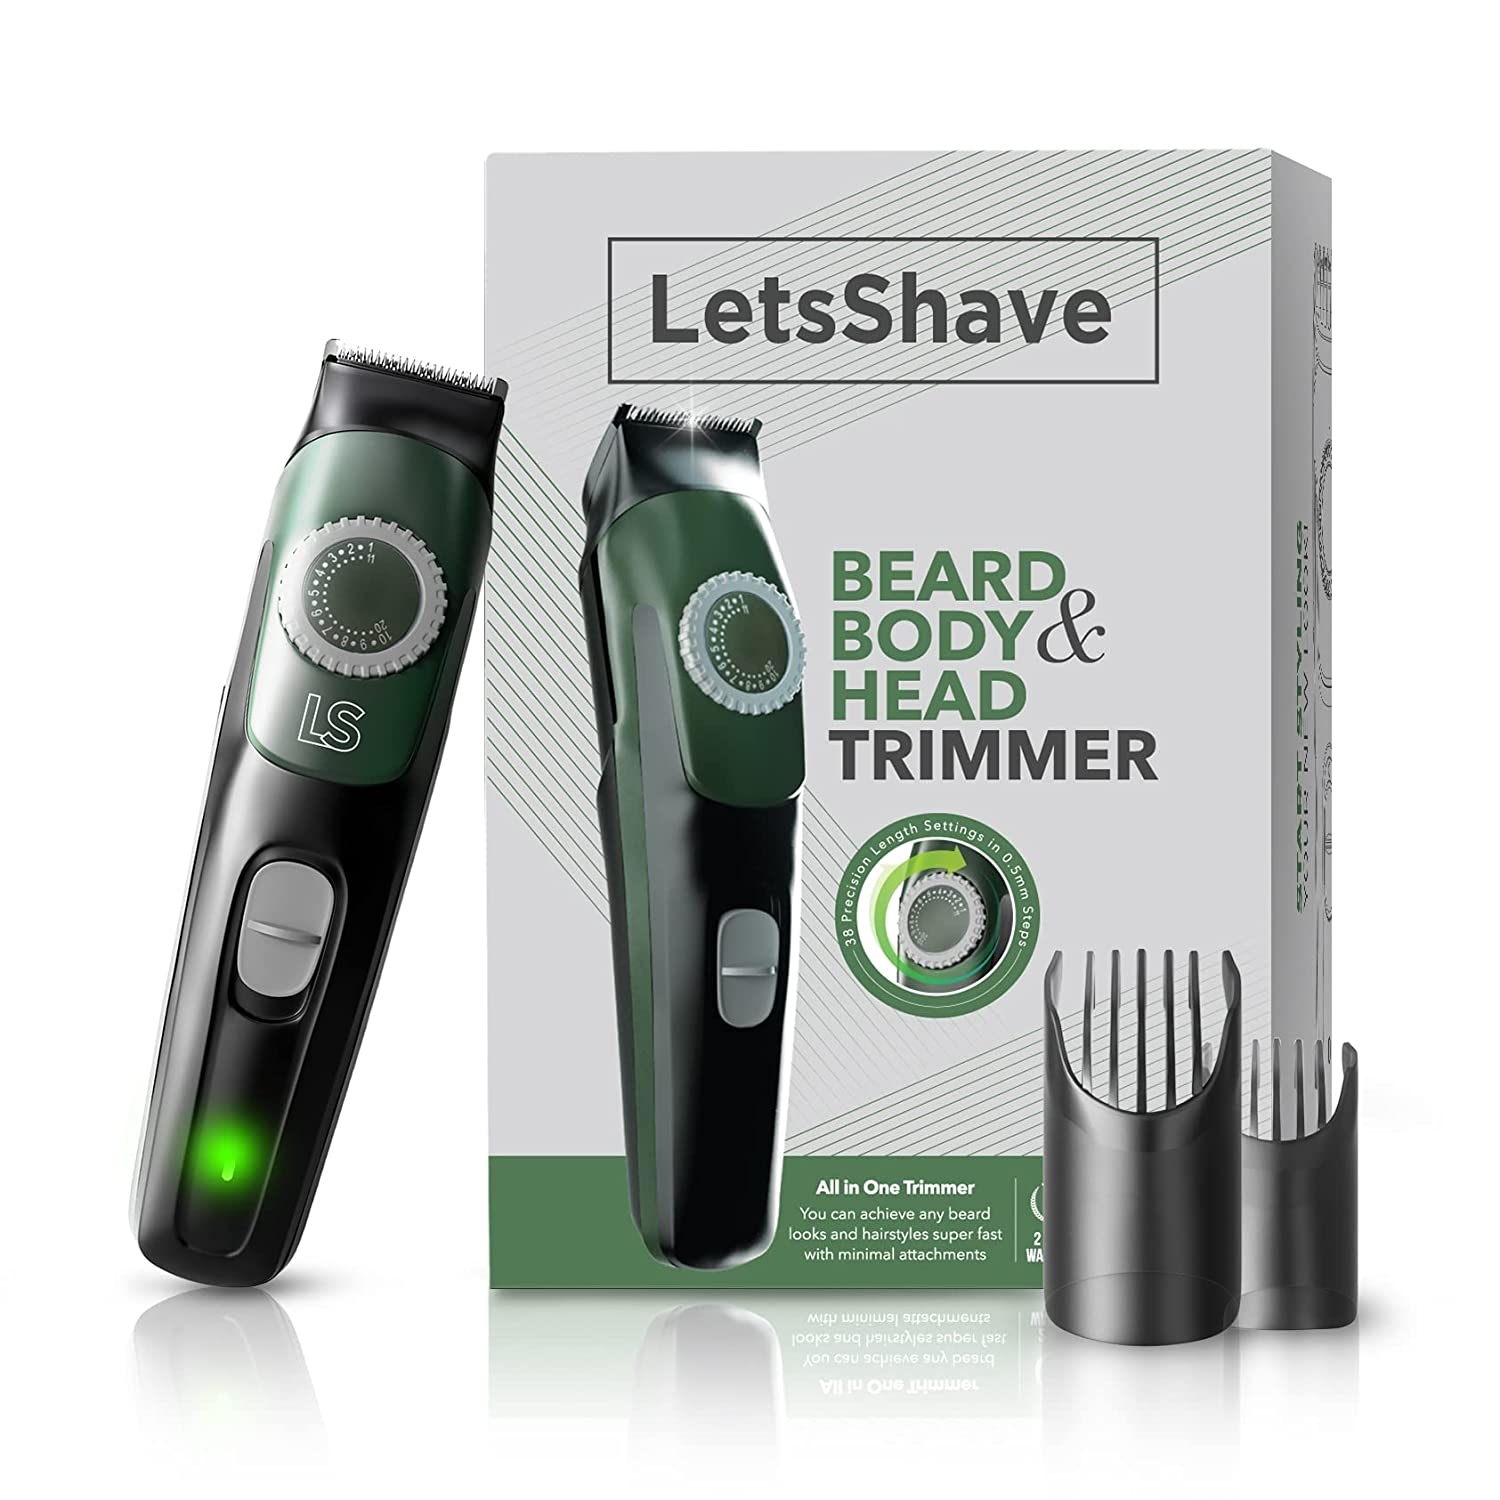 LetsShave | LetsShave Beard, Body & Head Trimmer - Fast Charge, 38 Precision Length Setting, Cord & Cordless Usage